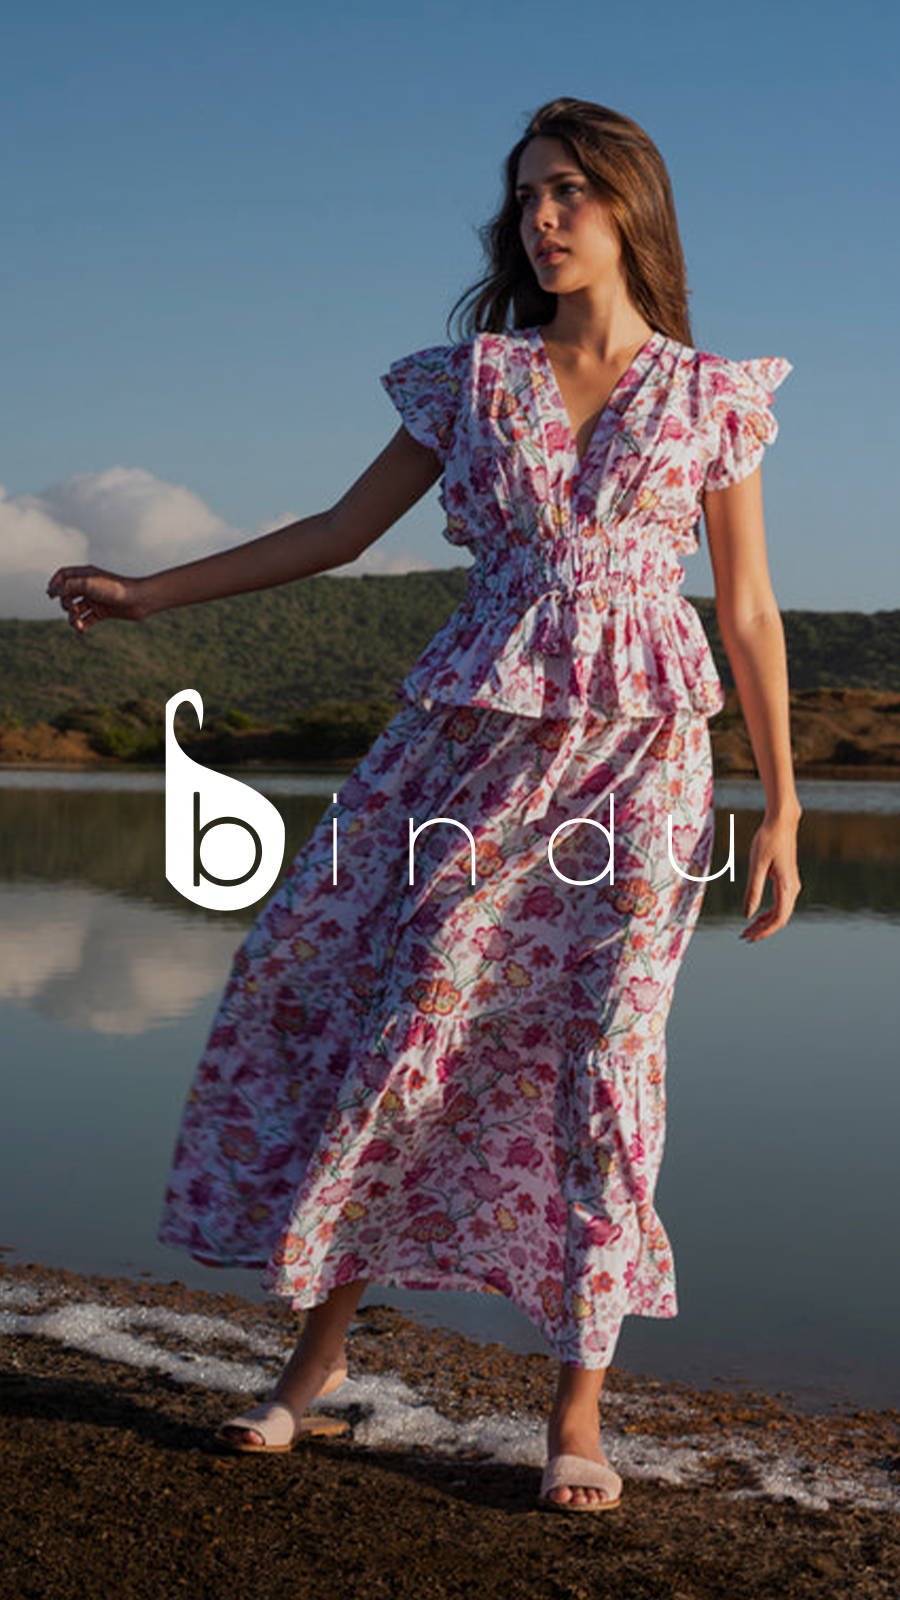 Young woman standing on bFabric with floral dress and sandals